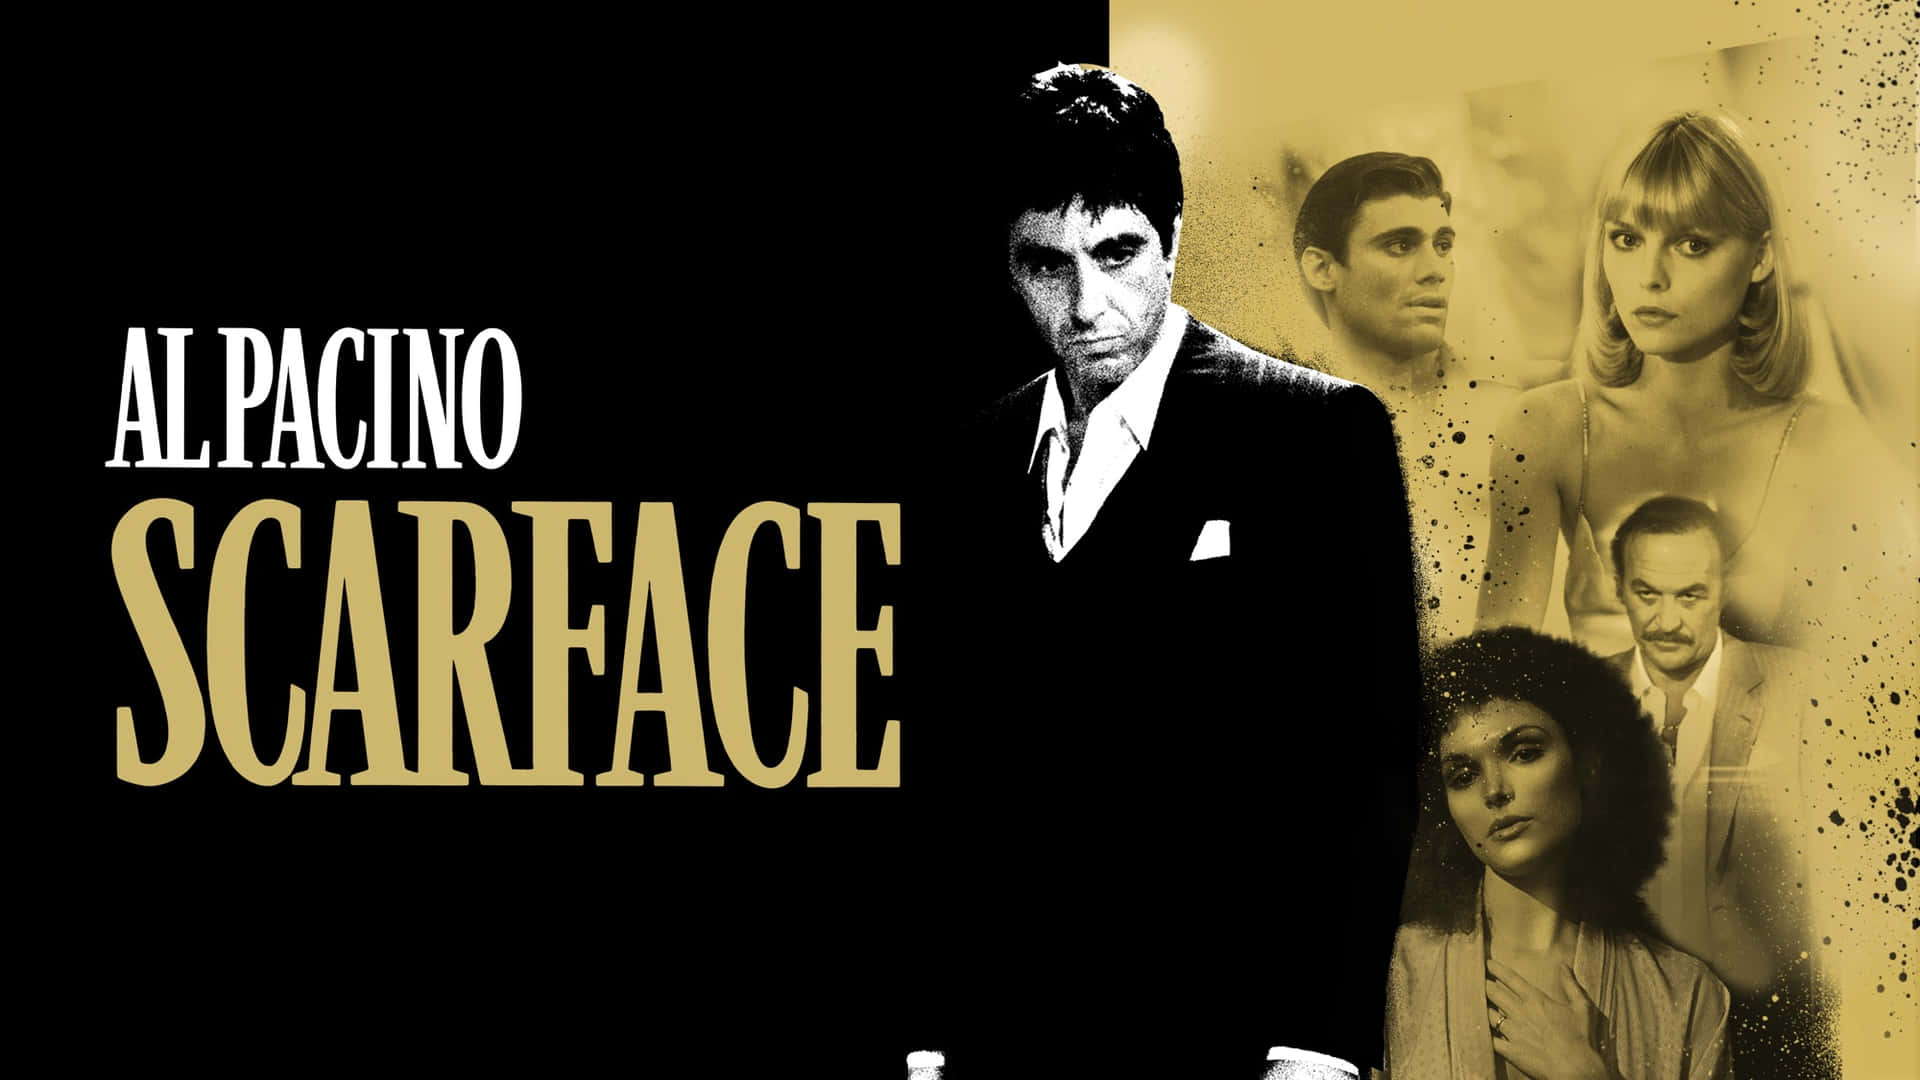 Al Pacino Scarface Movie Collage Background